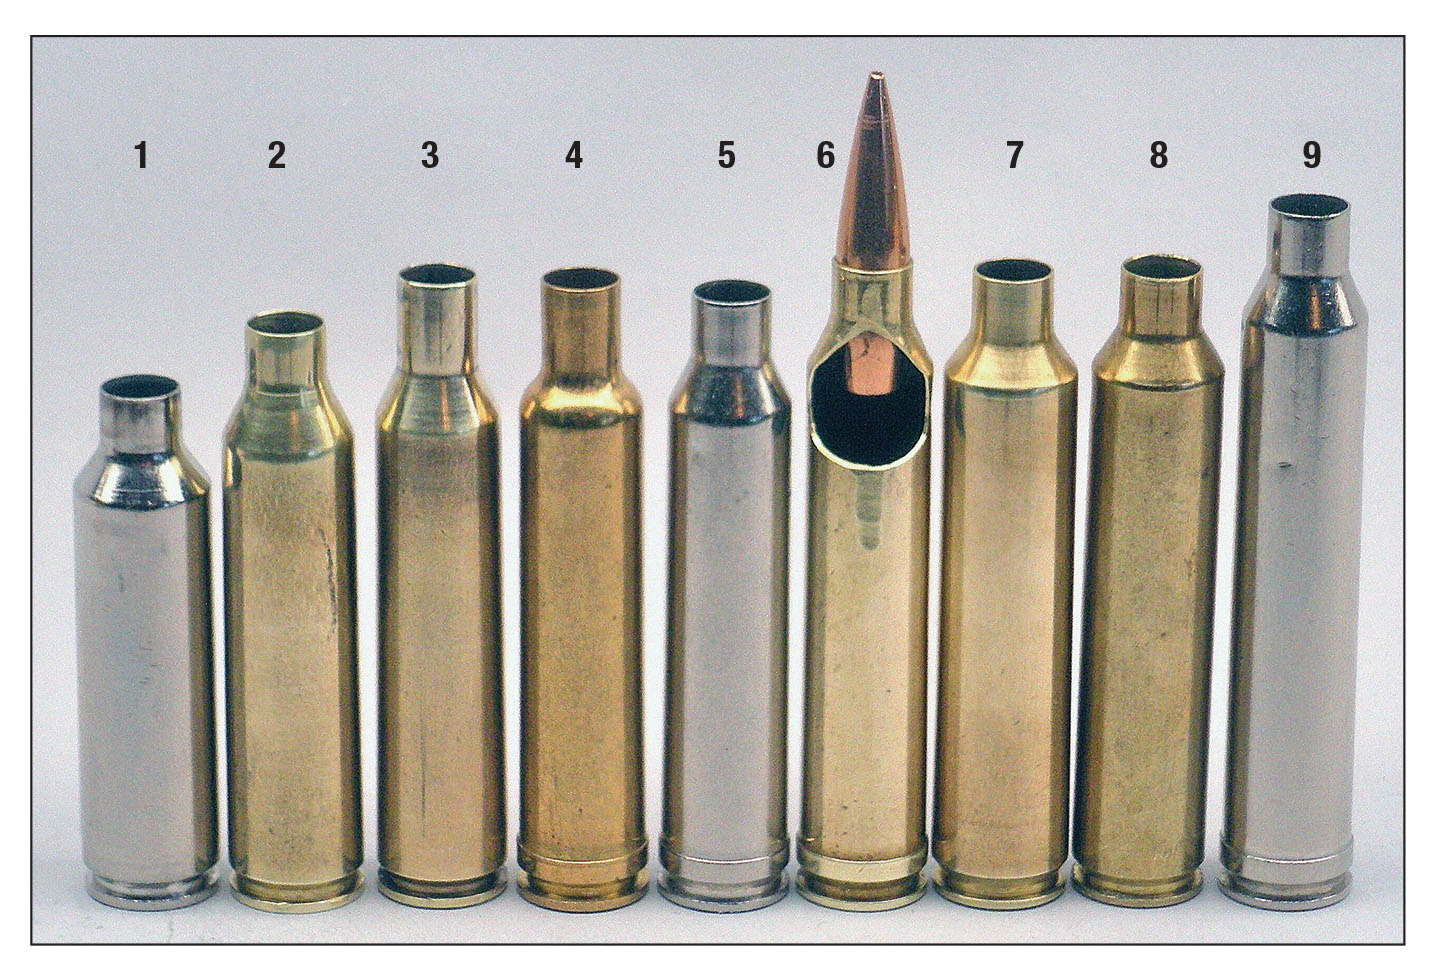 The sectioned 7mm-300 Winchester Magnum (6) shows seating depth for a Berger 140-grain VLD that is representative for all the cartridges shown: (1) 7mm WSM, (2) 7mm-404, (3) 7mm Newton, (4) 7mm Weatherby Magnum, (5) 7mm Remington Magnum, (7) .28 Nosler, (8) 7mm-375 Ruger and (9) 7mm STW.